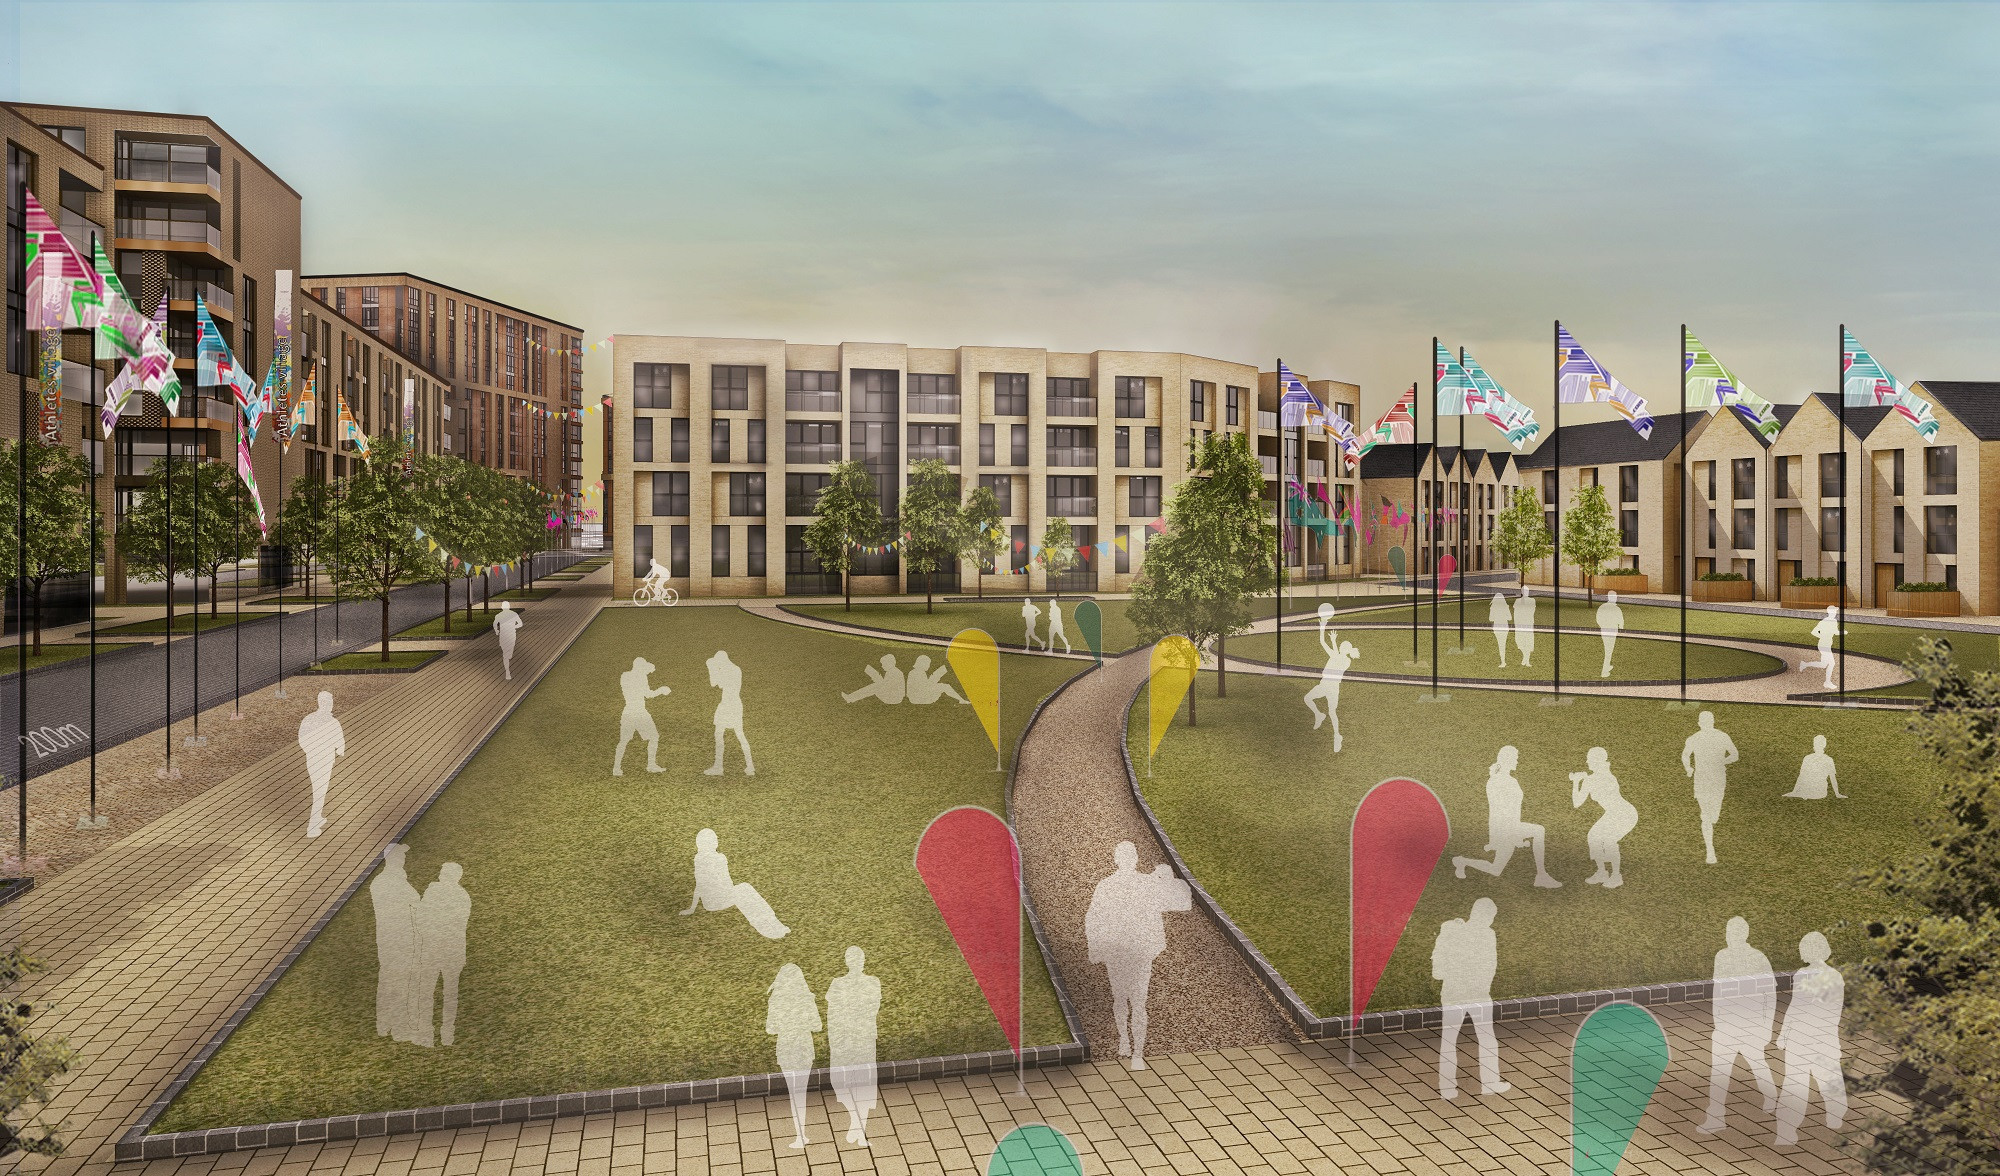 Birmingham 2022 outline housing legacy for Commonwealth Games Village